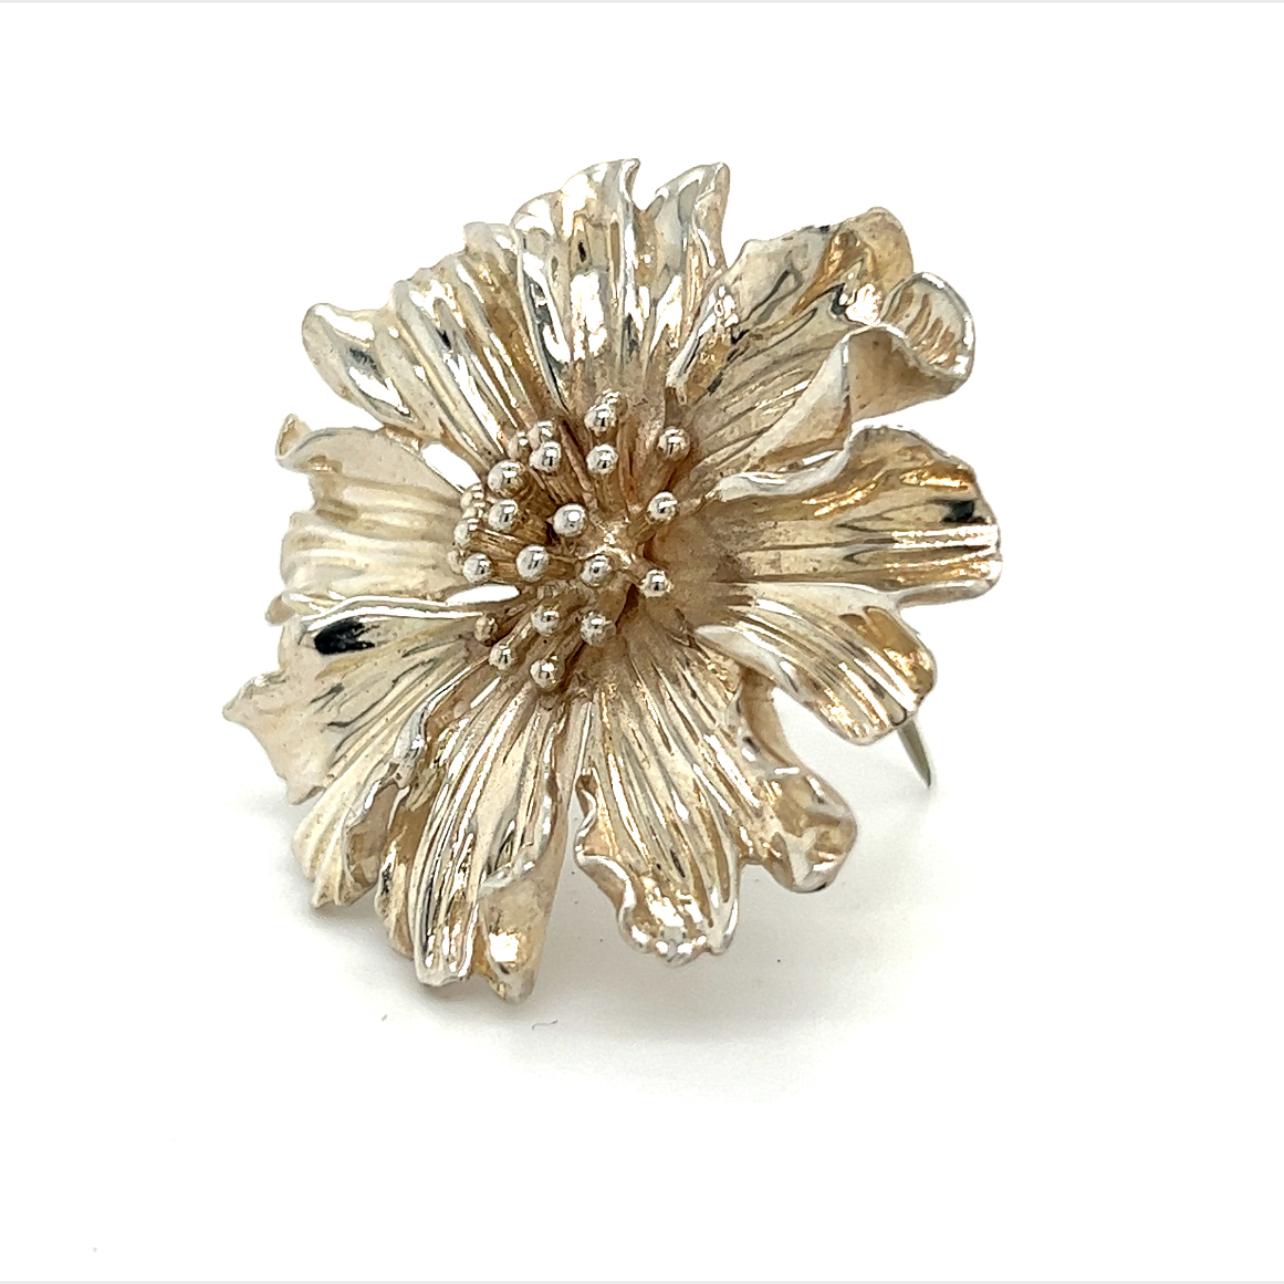 Tiffany & Co Estate Marigold Flower Brooch Pin Sterling Silver TIF301

This elegant Authentic Tiffany & Co Silver brooch has a weight of 13.2 Grams.

TRUSTED SELLER SINCE 2002

PLEASE SEE OUR HUNDREDS OF POSITIVE FEEDBACKS FROM OUR CLIENTS!!

FREE